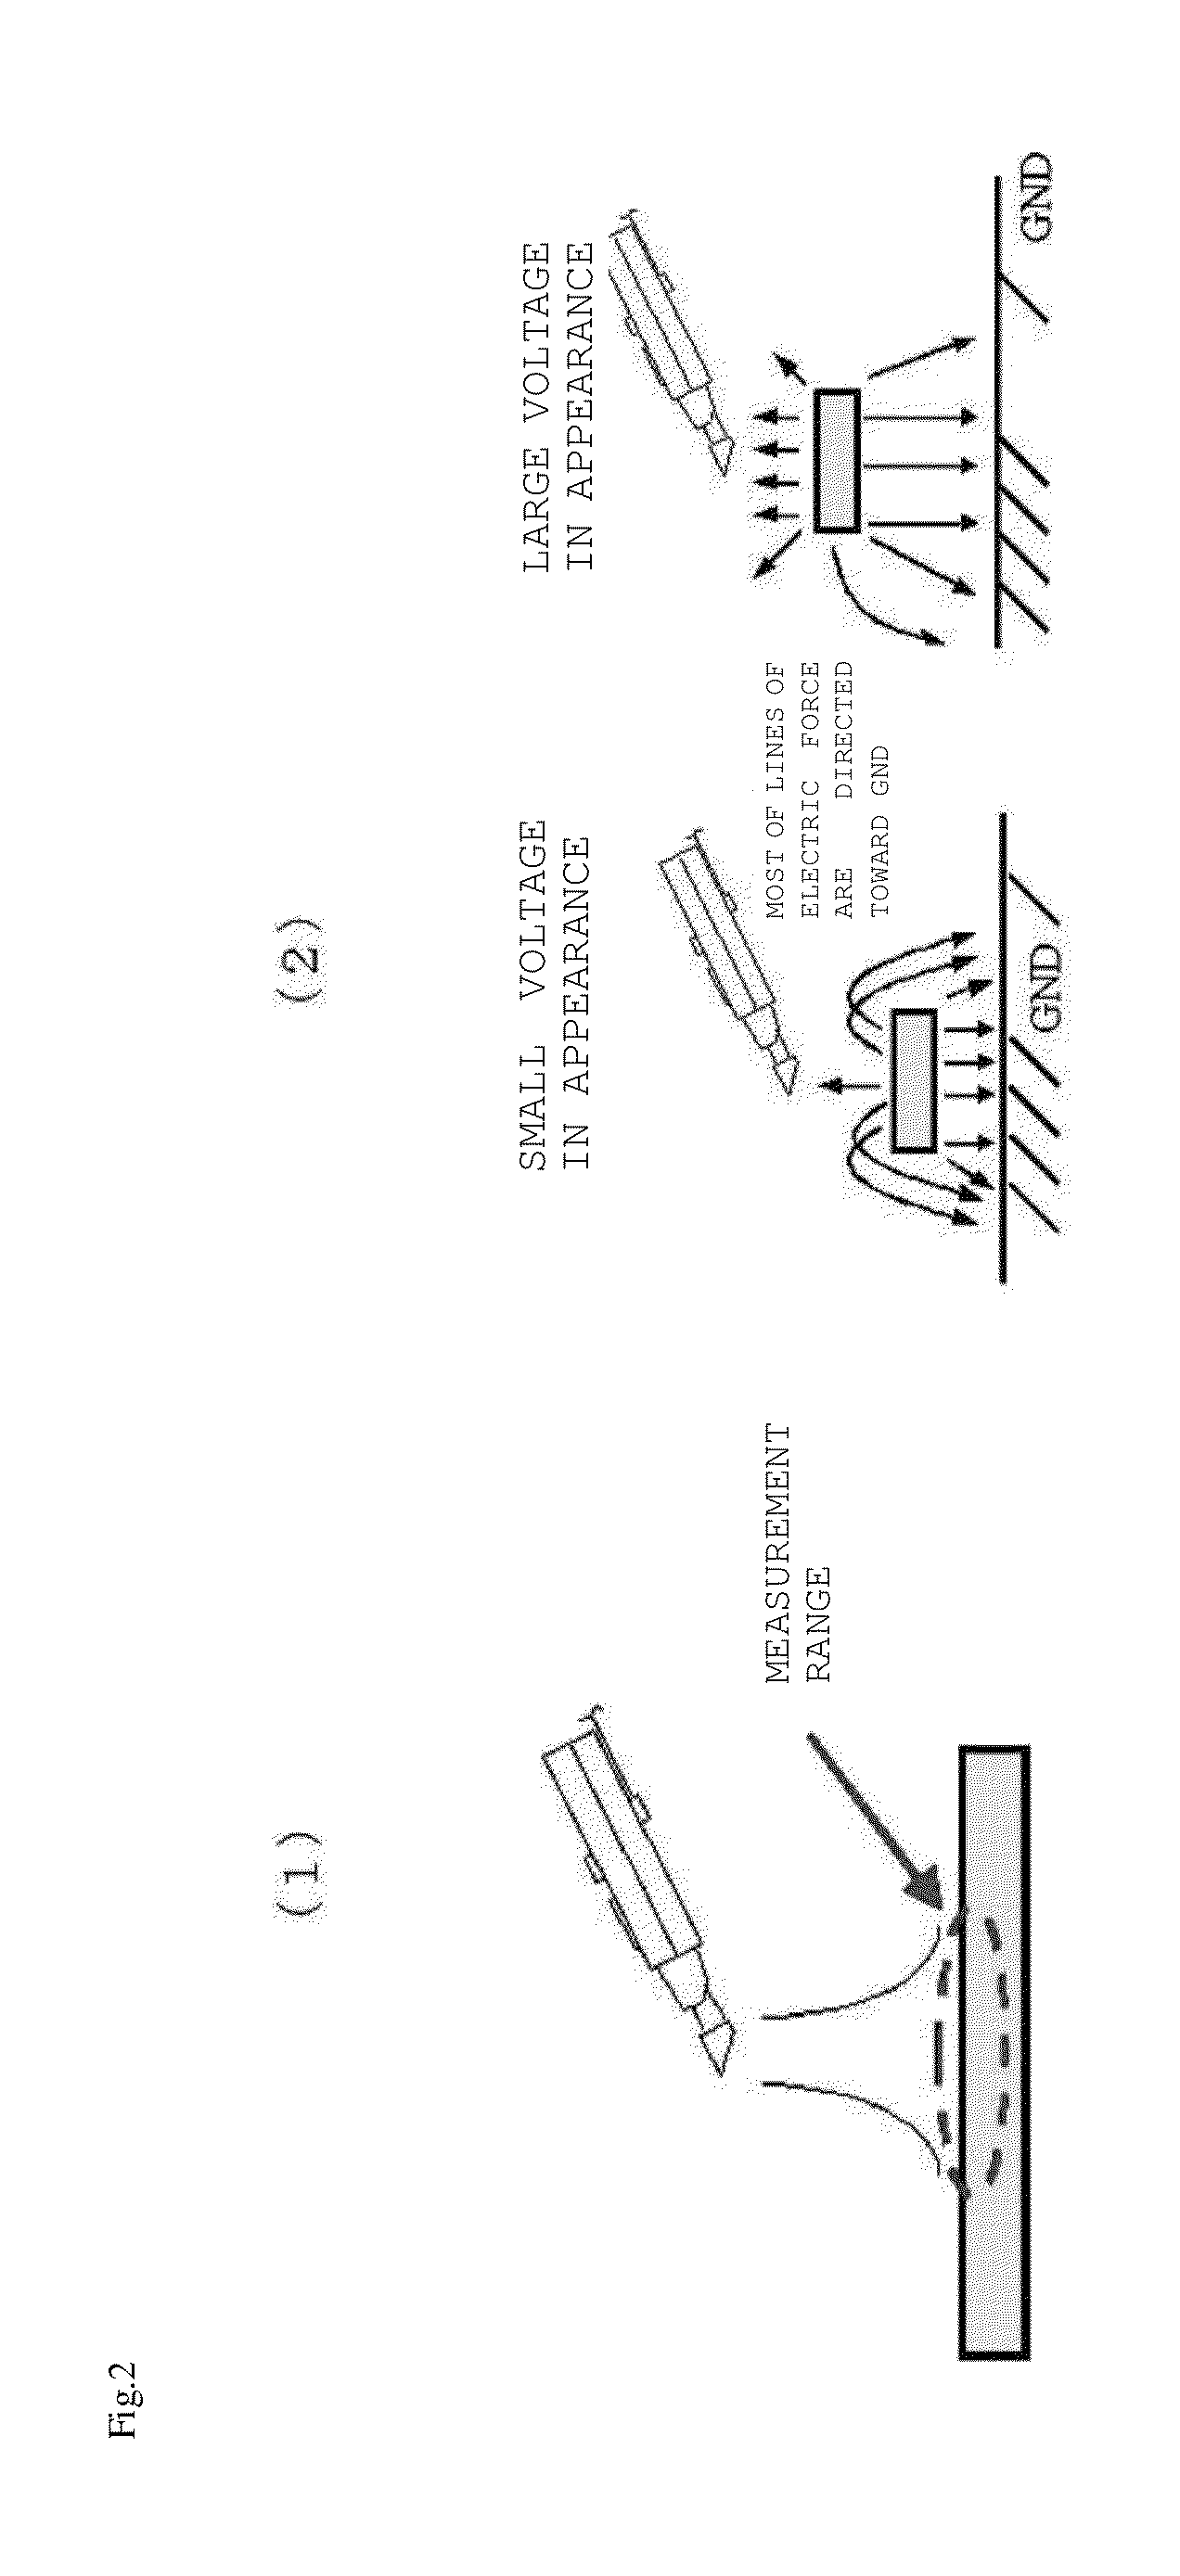 Static-electricity electrification measurement method and apparatus